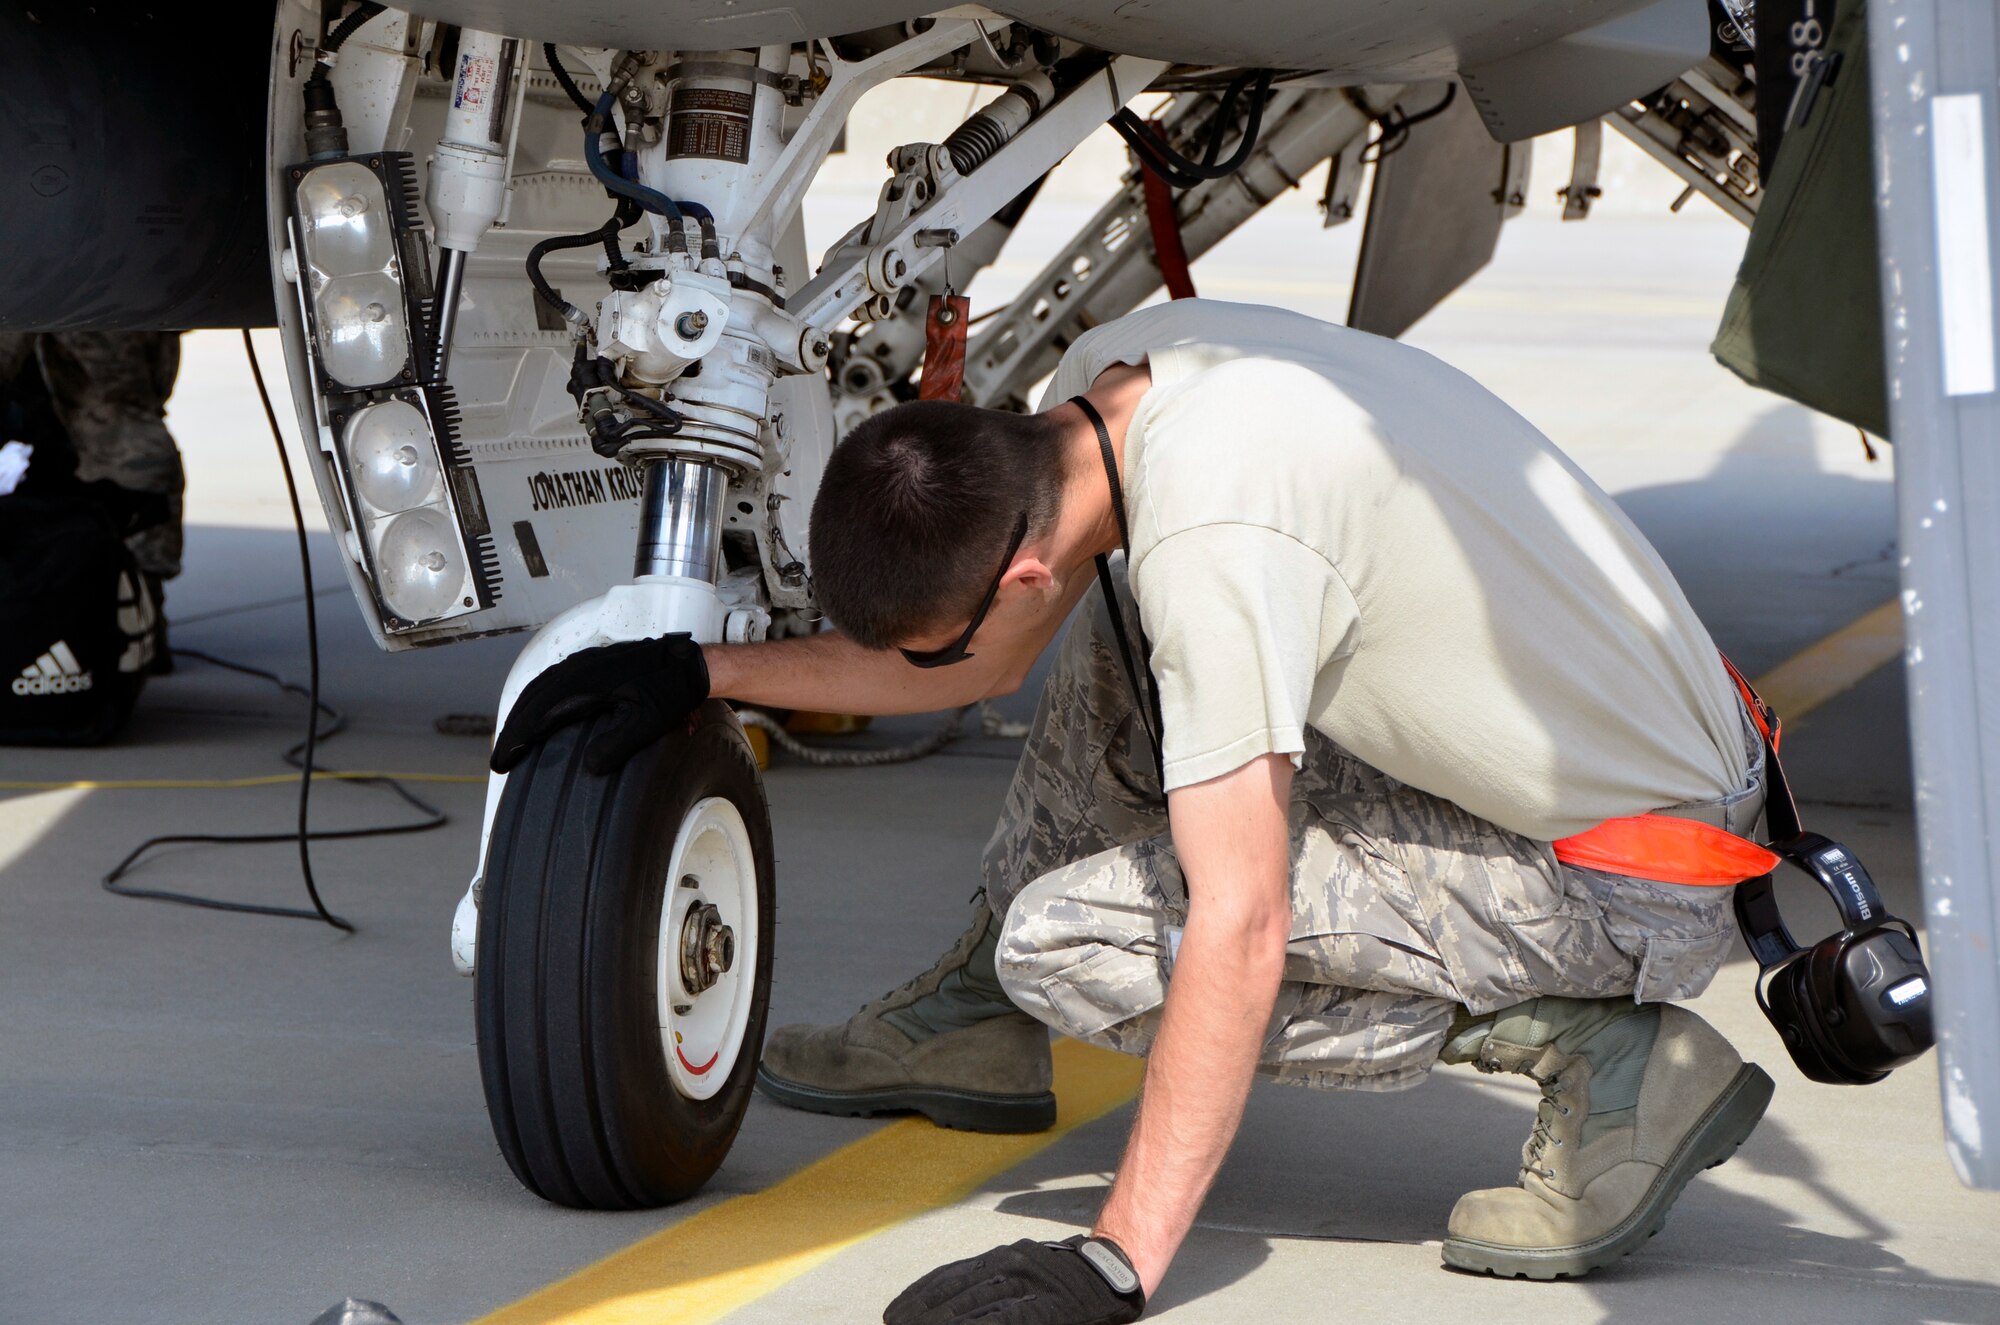 Lask Air Base, Poland -- Tech. Sgt. Scott Schmit, 114th Aircraft Maintenance Squadron crew chief, inspects a nose tire on an F-16 Fighting Falcon after arriving here Sept. 3. A thorough inspection is accomplished after each flight to ensure the jet is safe and ready to fly the next mission.  (U.S. Air National Guard photo by Capt. Amy Rittberger/Released)